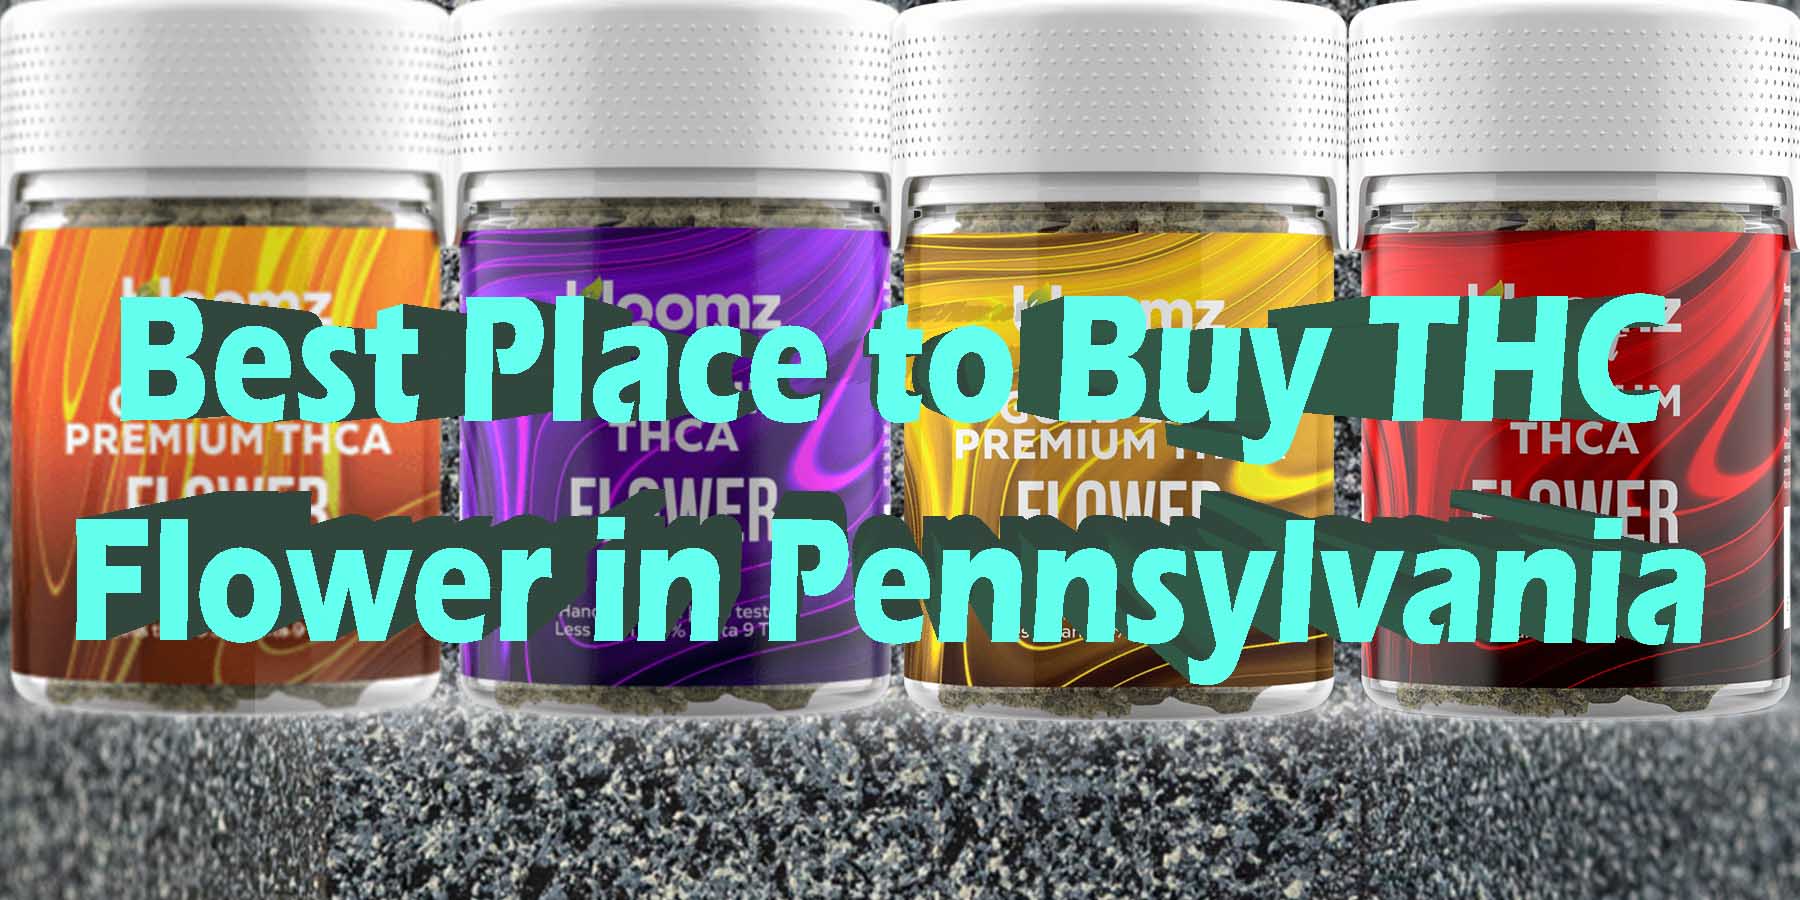 Best Place to Buy THC Flower in Pennsylvania BestPlace-LowestPrice-Coupon-Discount-For-Smoking High Smoke Shop Online Near Me Strongest Binoid